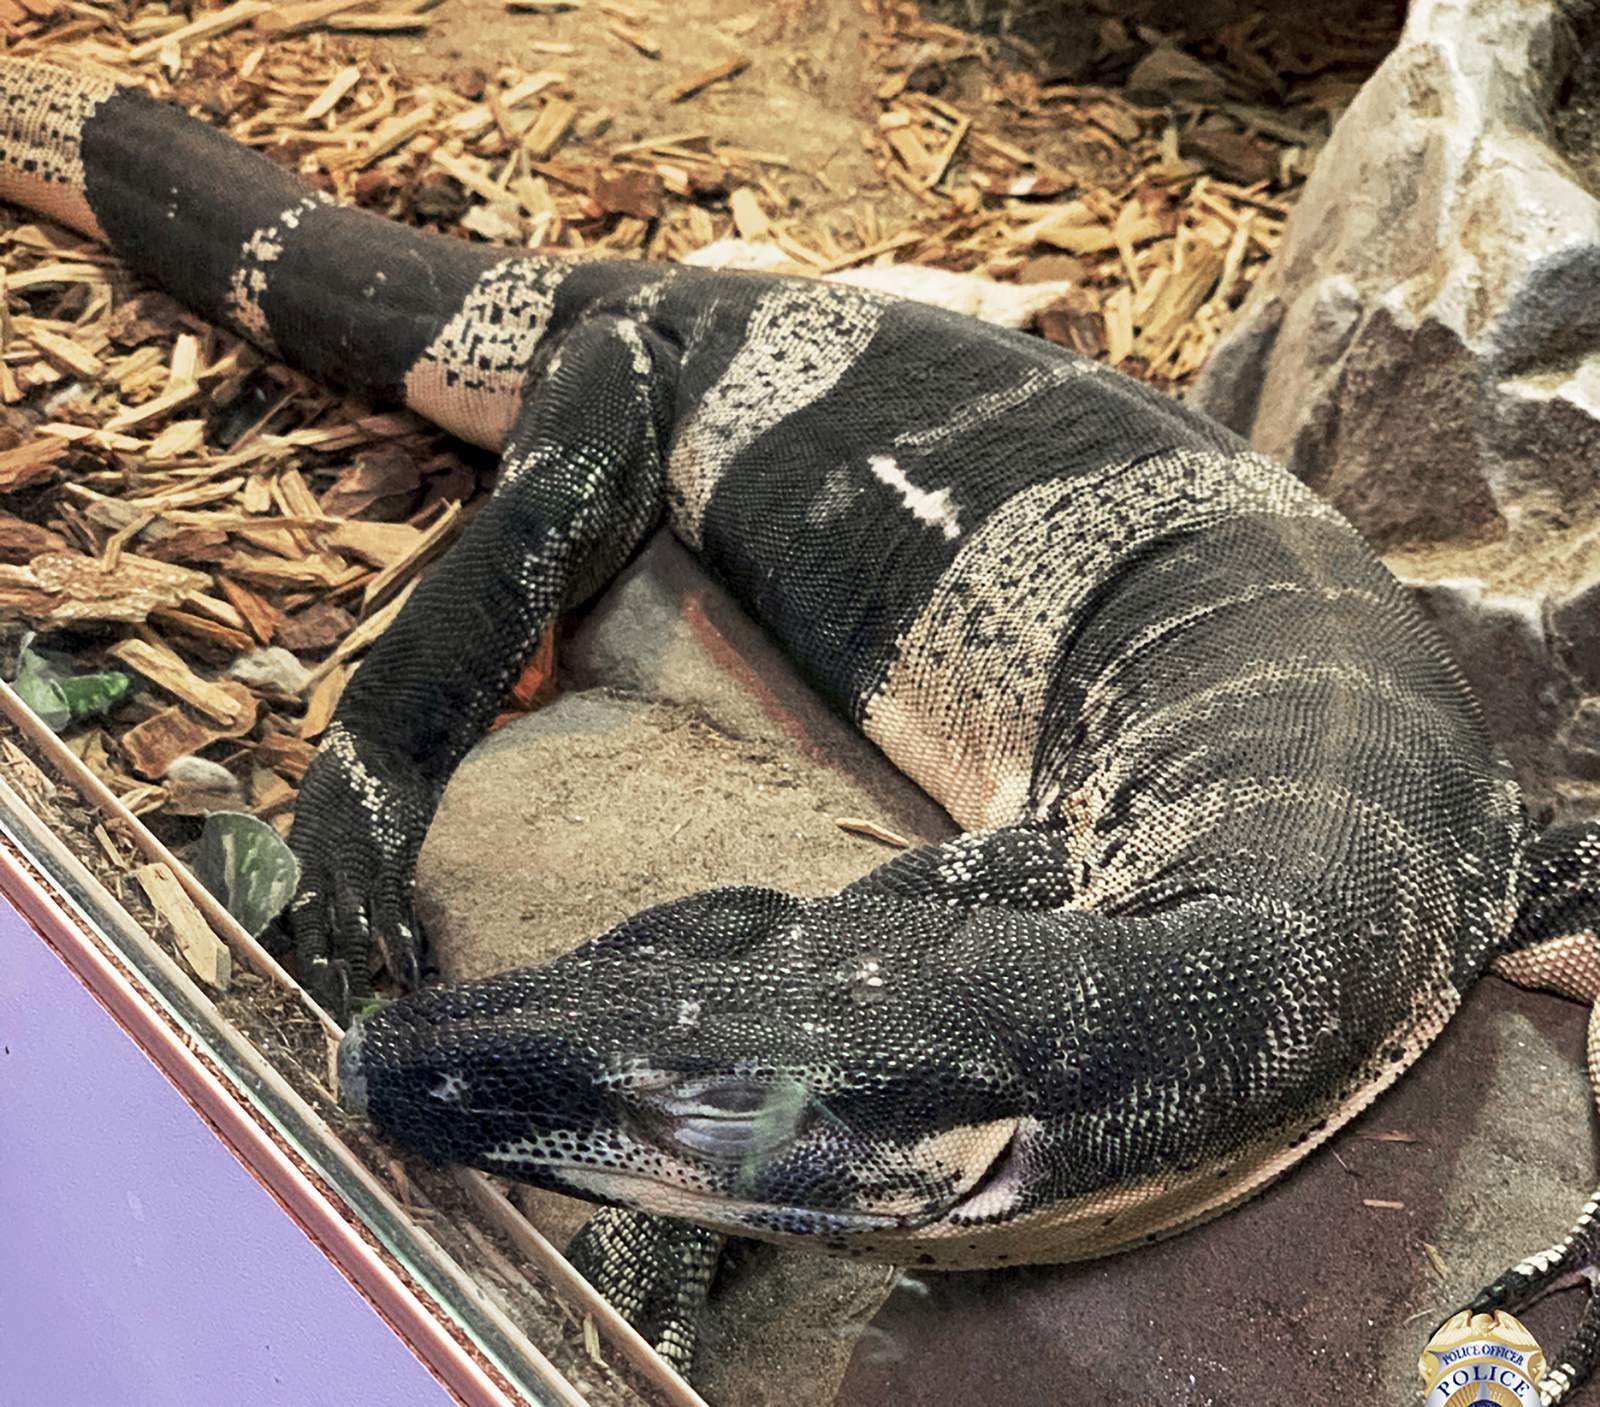 California police recover lizards stolen from reptile store